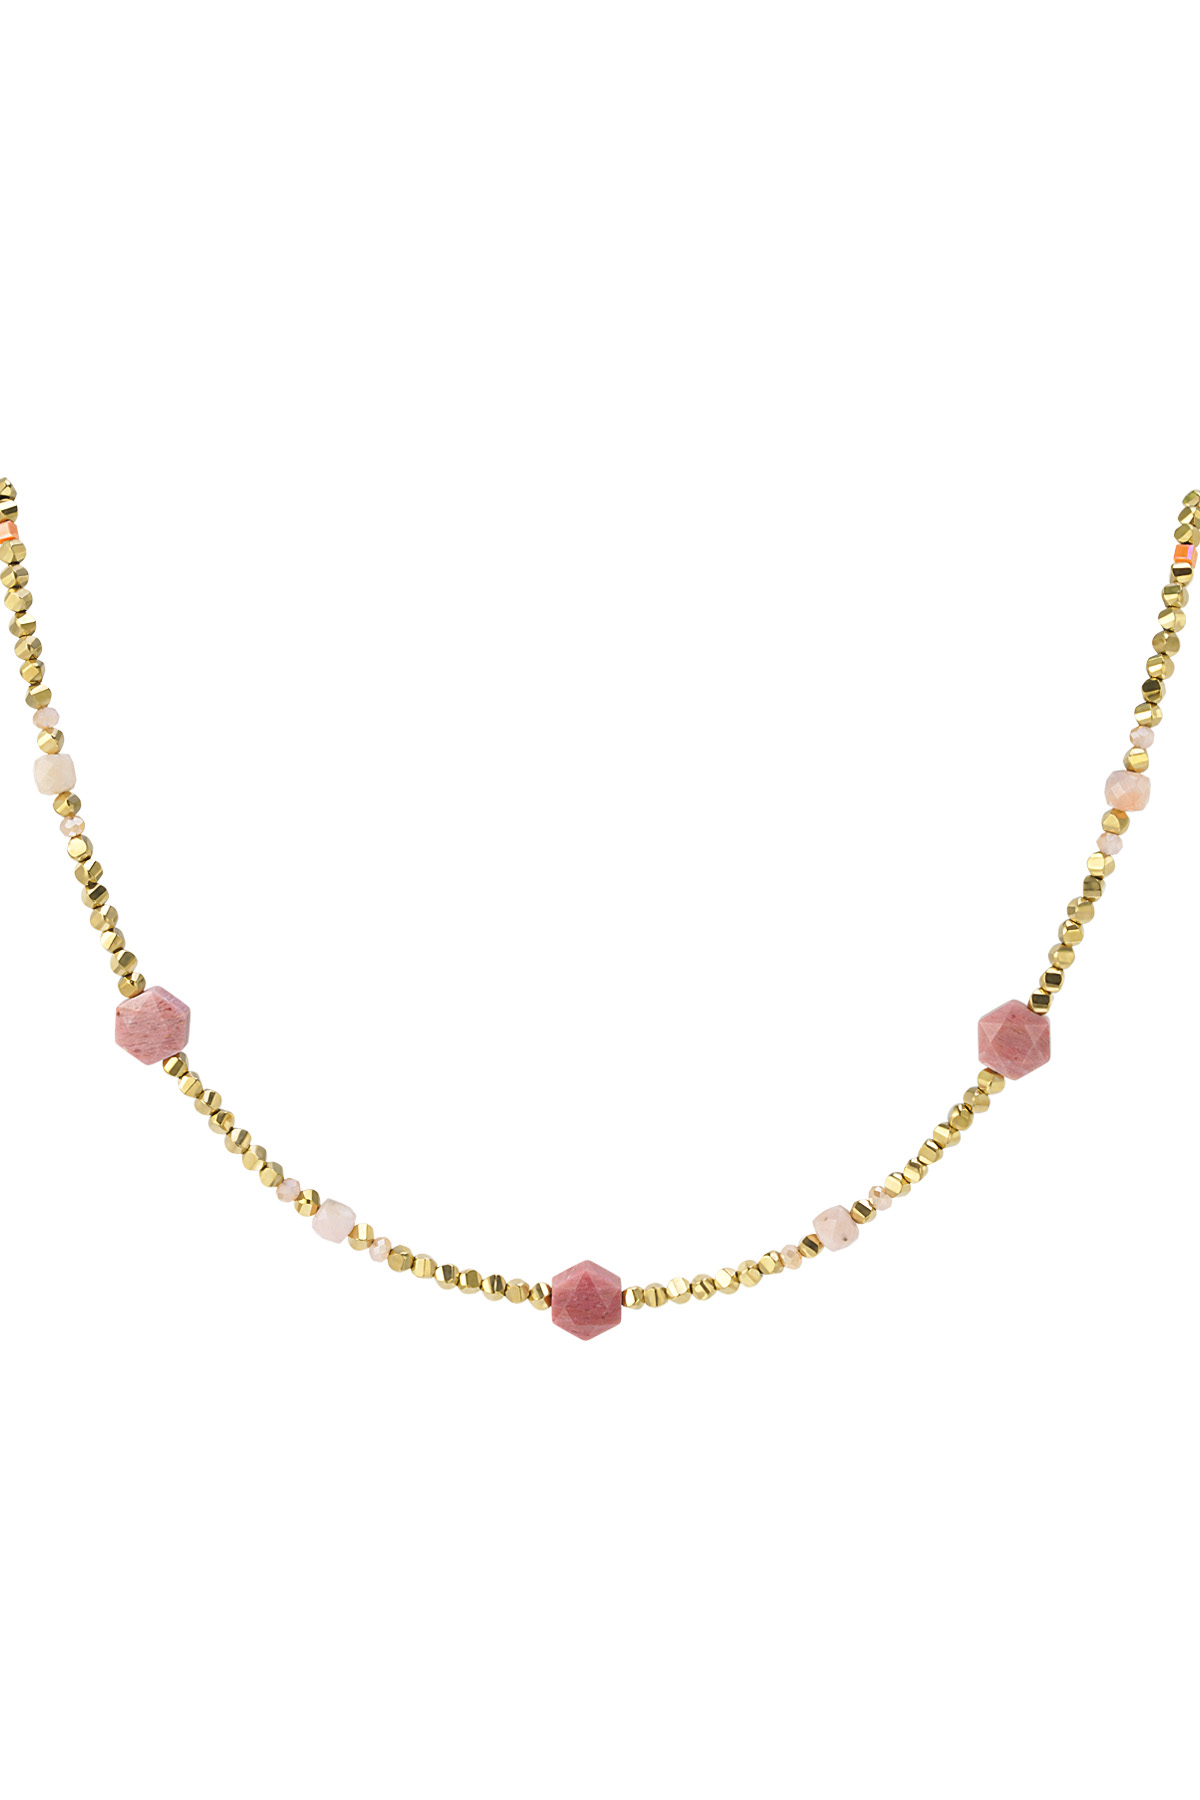 Beaded necklace different beads - pink &amp; gold Stainless Steel